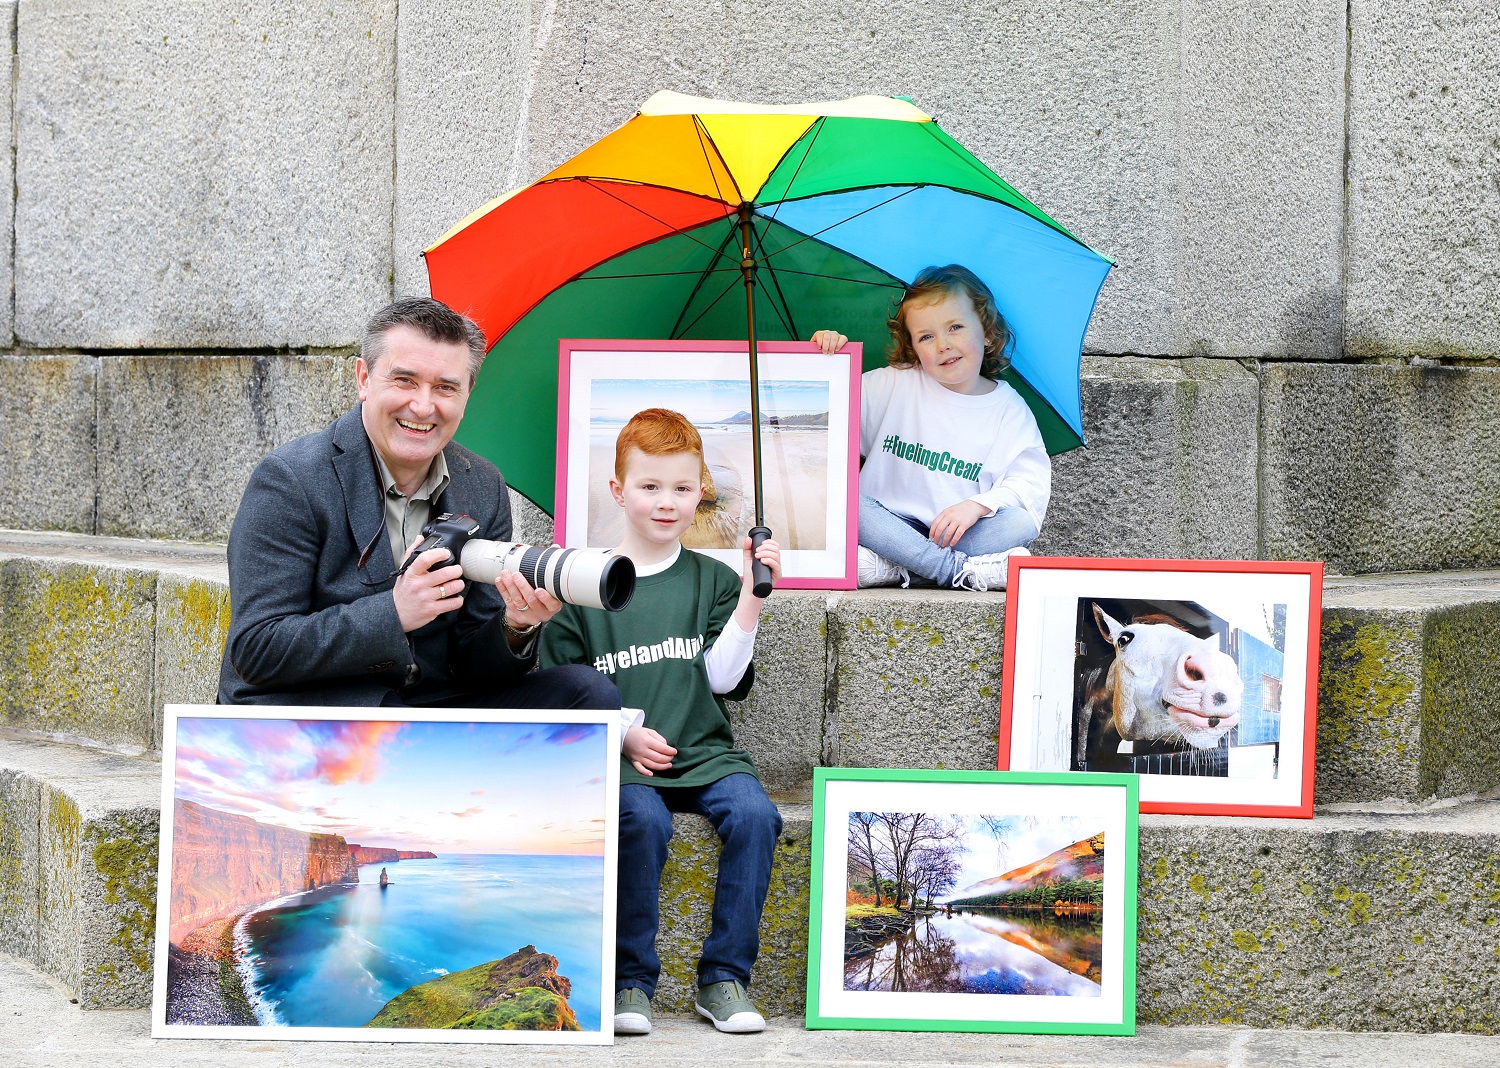 ‘Ireland Alive’ revealed as theme for Top Oil photo comp